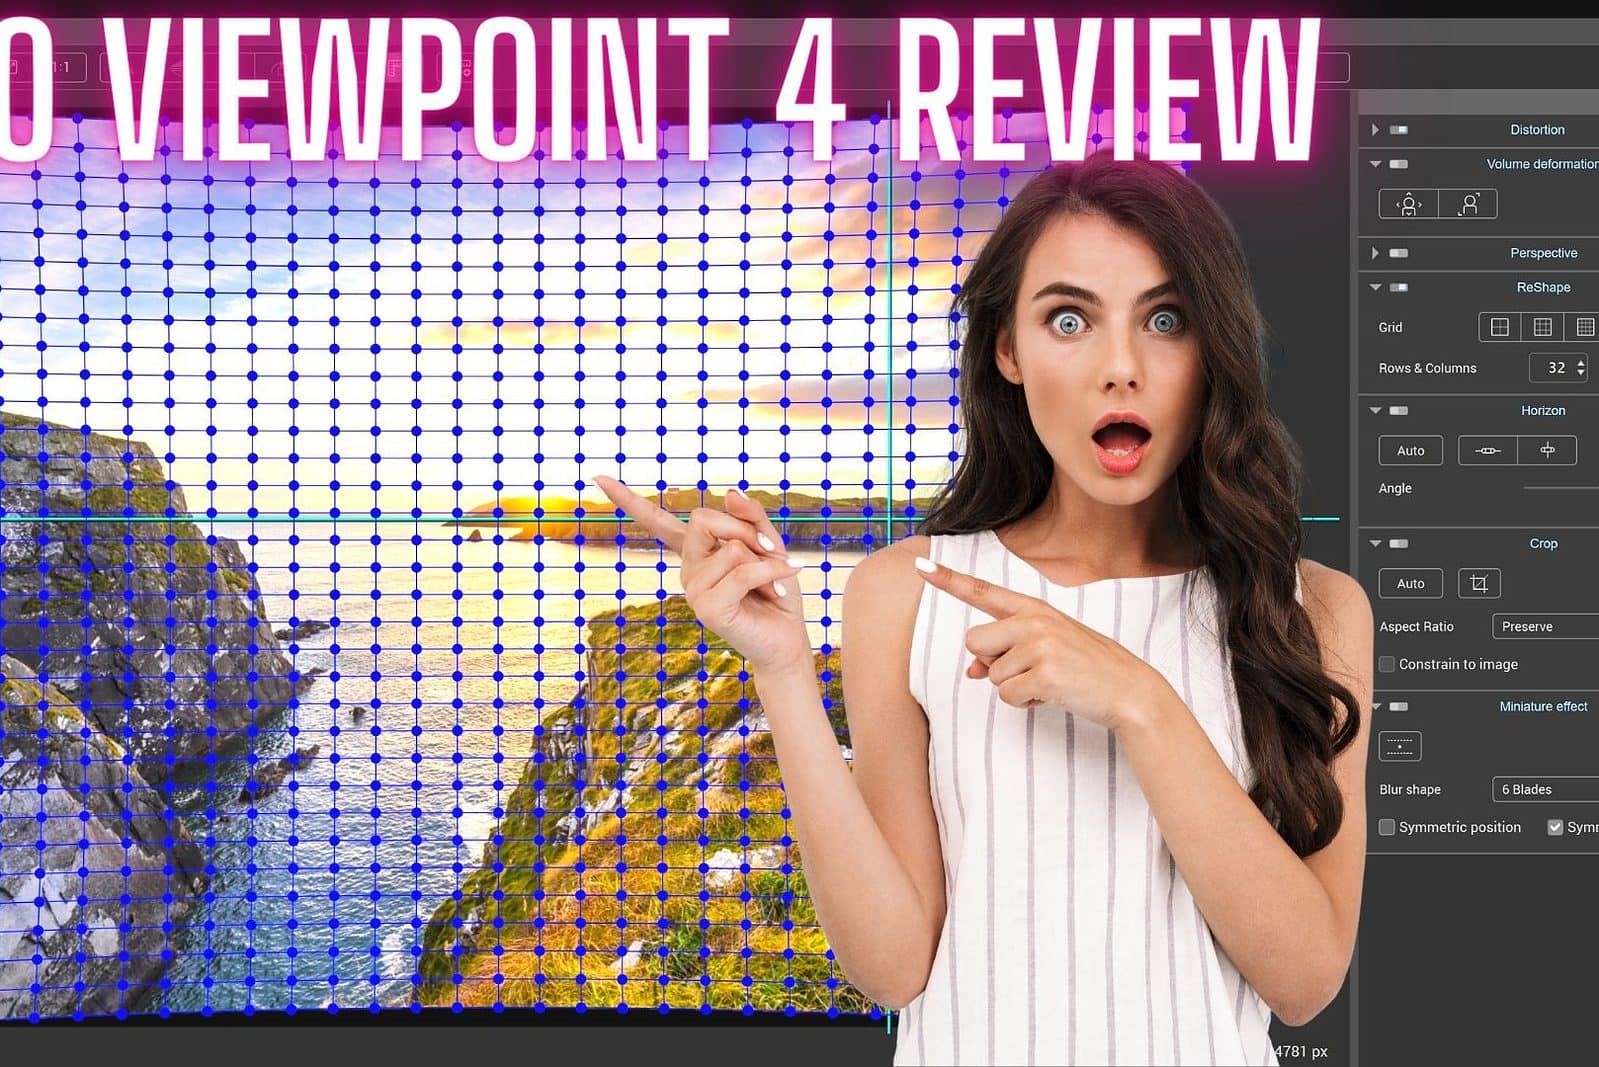 dxo viewpoint 4 review